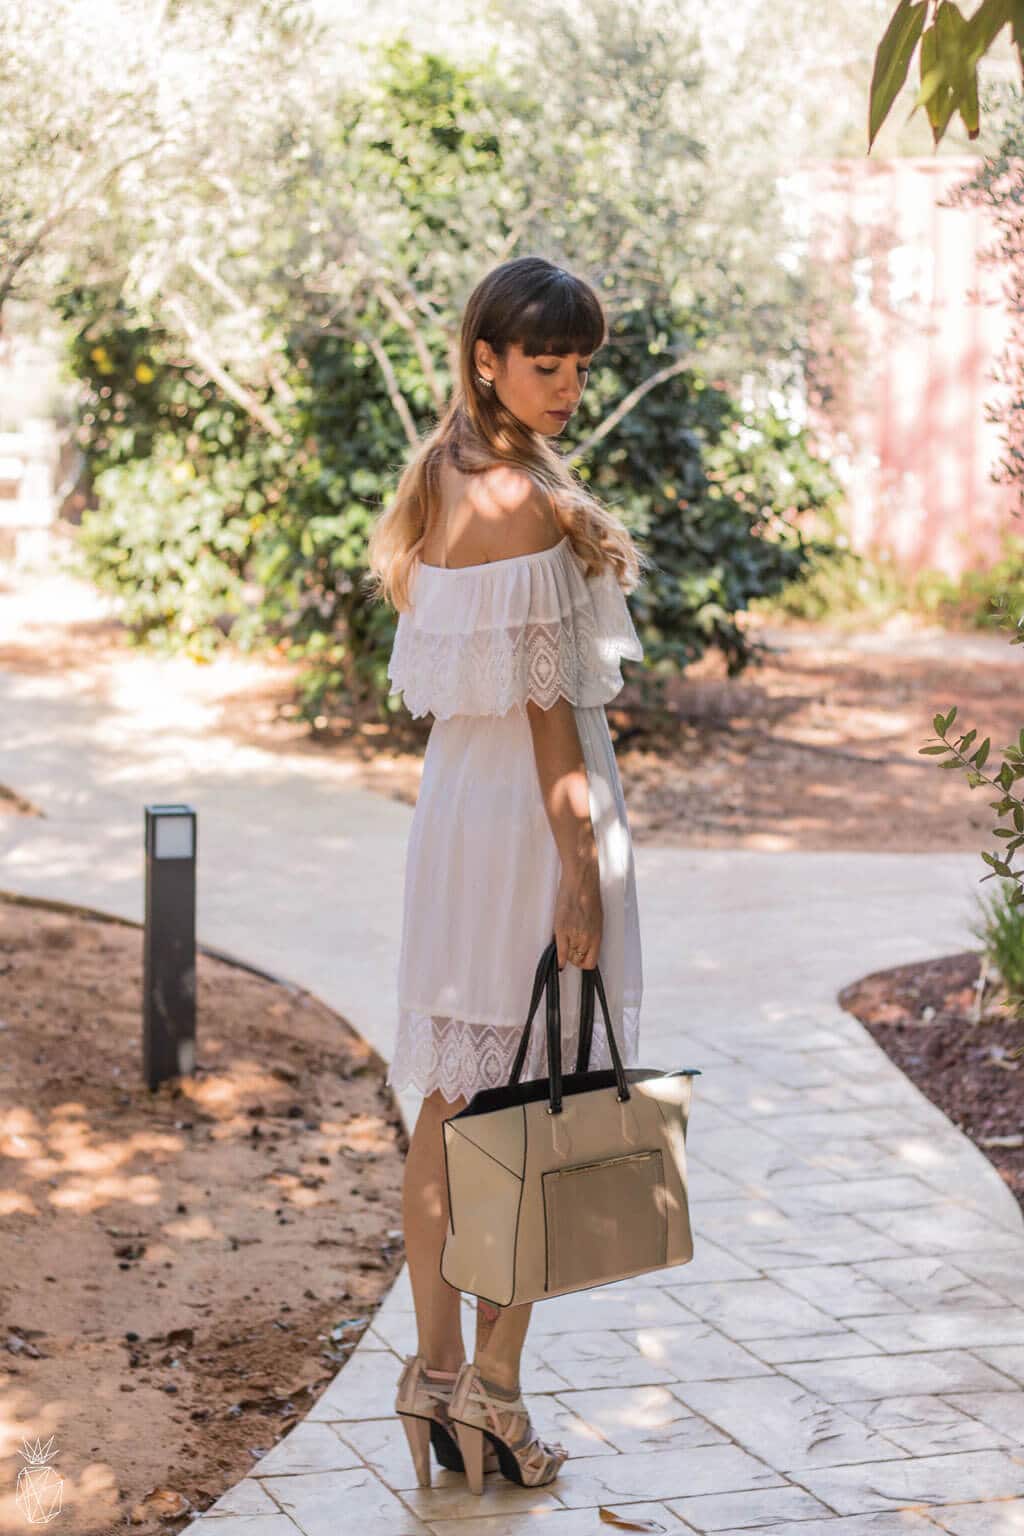 White Lace - off the shoulder TopShop dress | country side photoshoot | Long ombre hair with bangs | Topshop geometric nude bag | Click through for the full photoshoot @ hedonistit.com